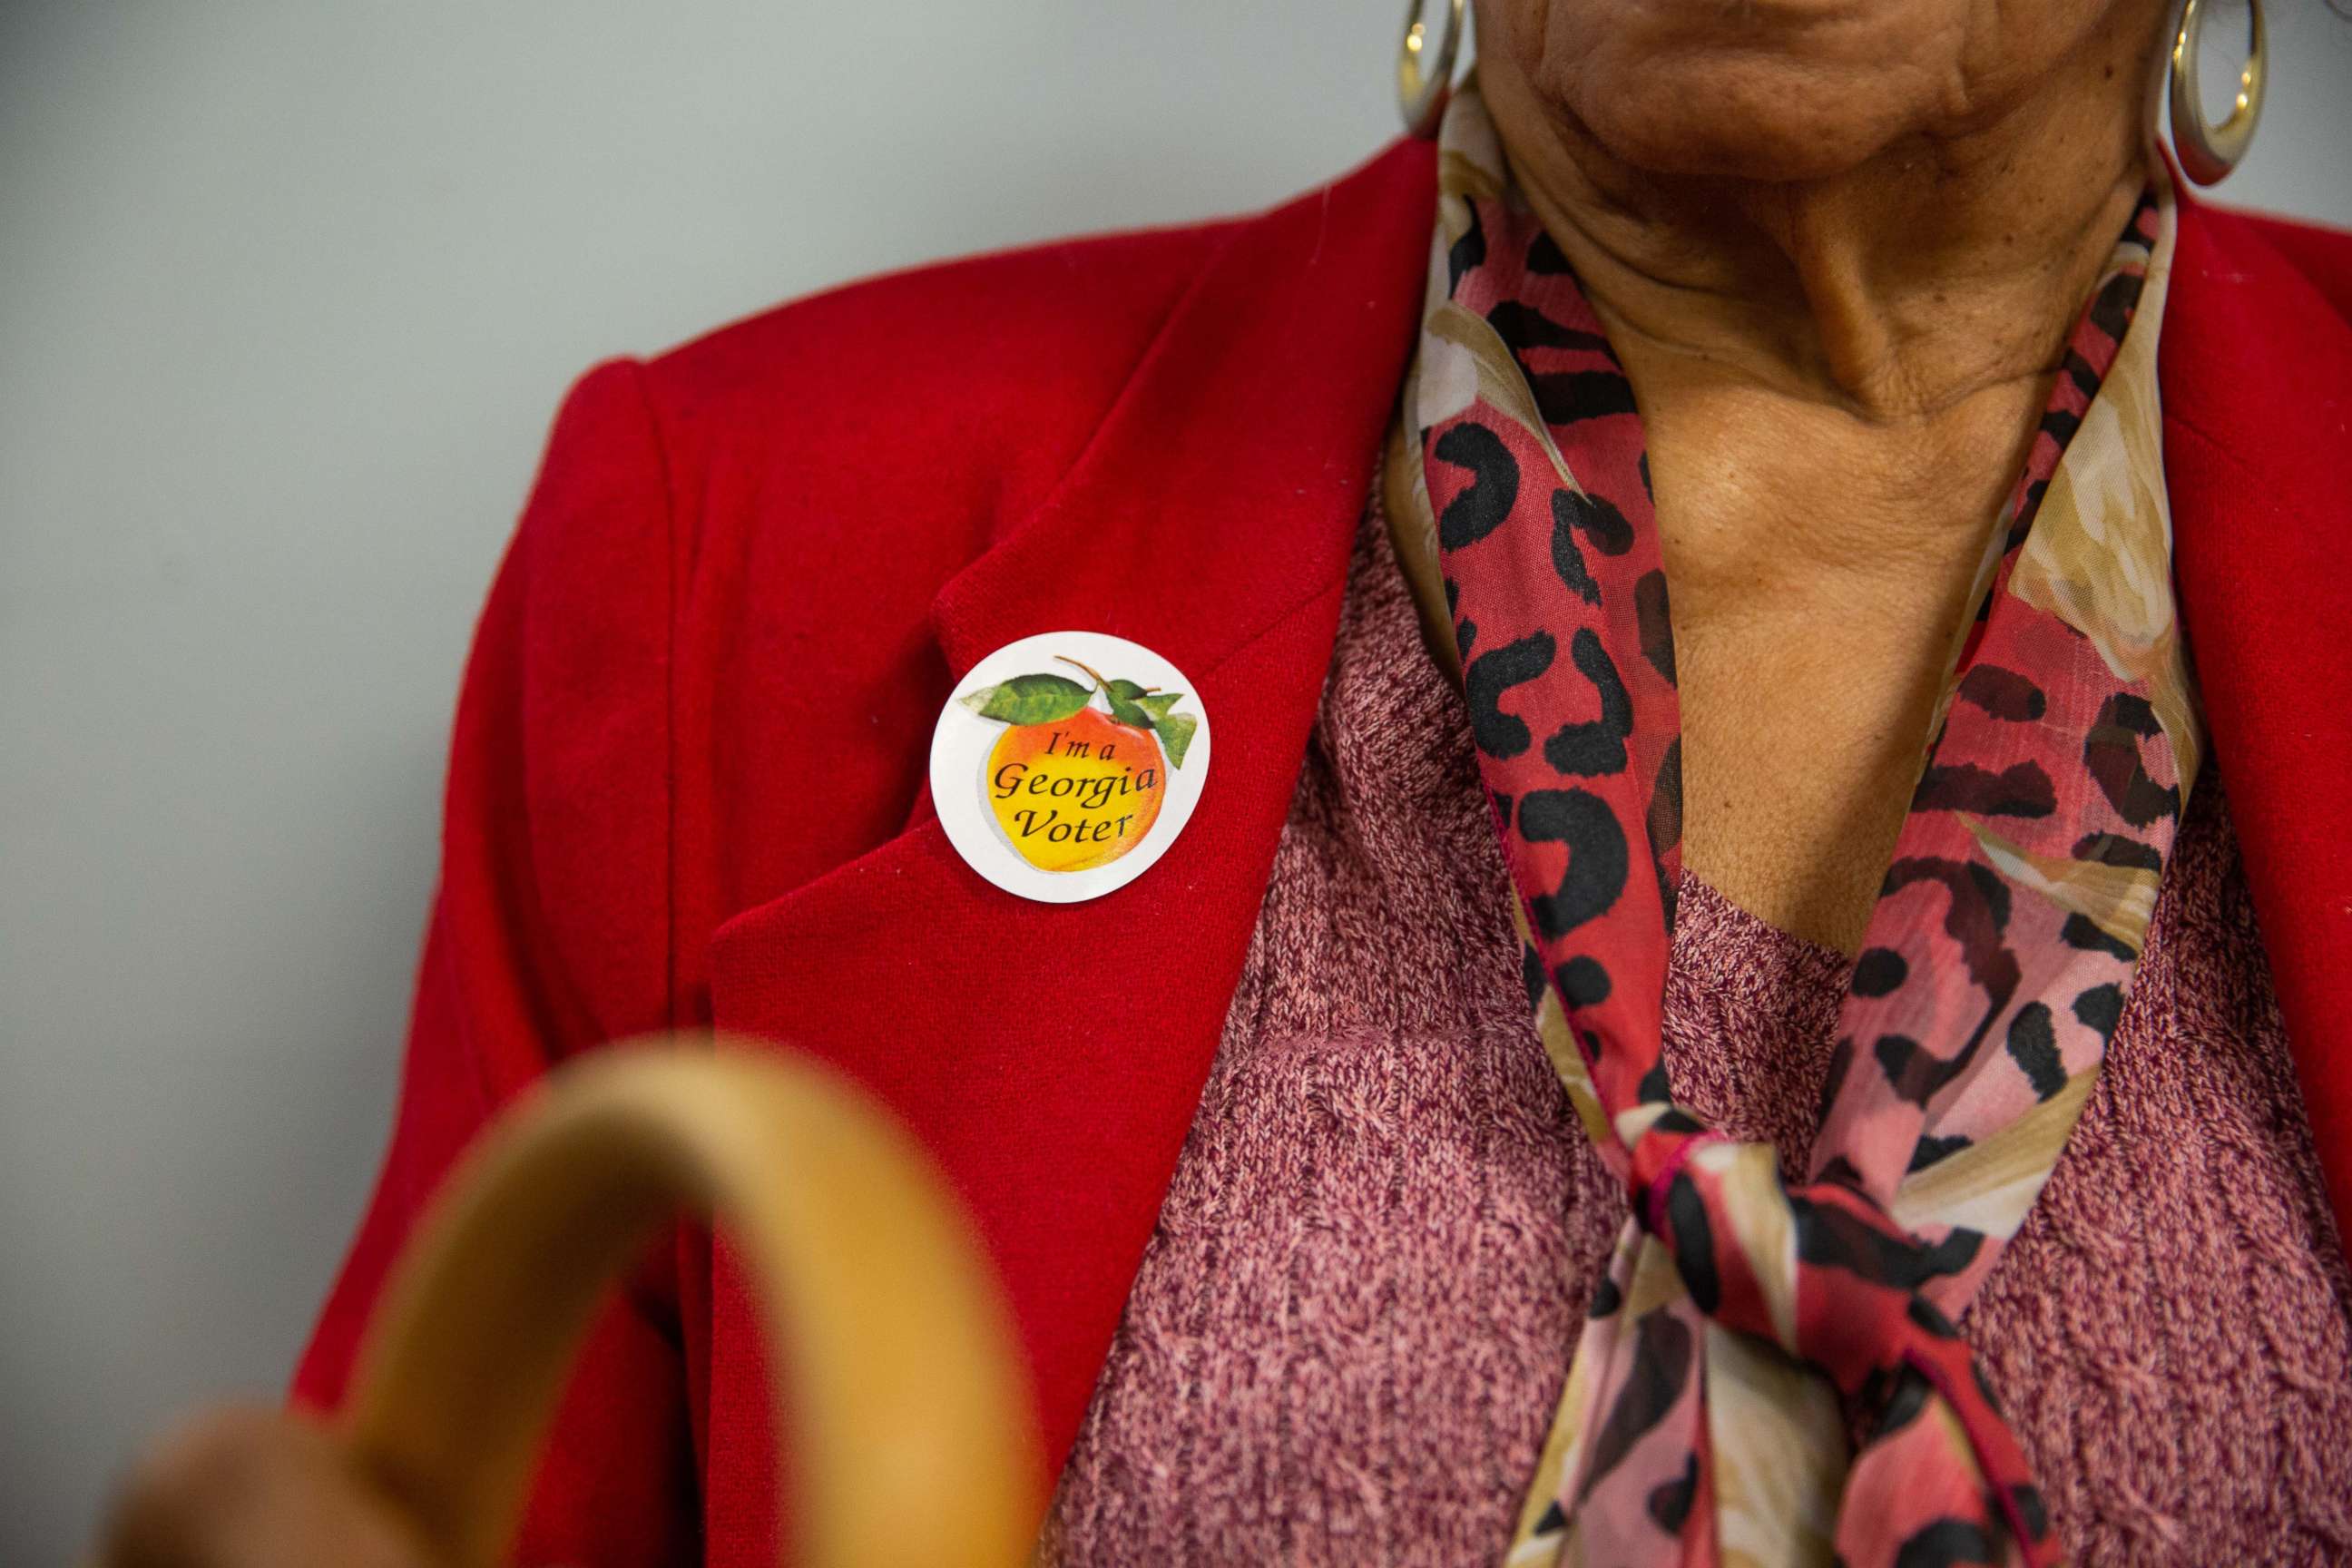 PHOTO: A voter wears a sticker that reads "I'm a Georgia Voter" at a polling station in Atlanta, Ga., Nov. 6, 2018.